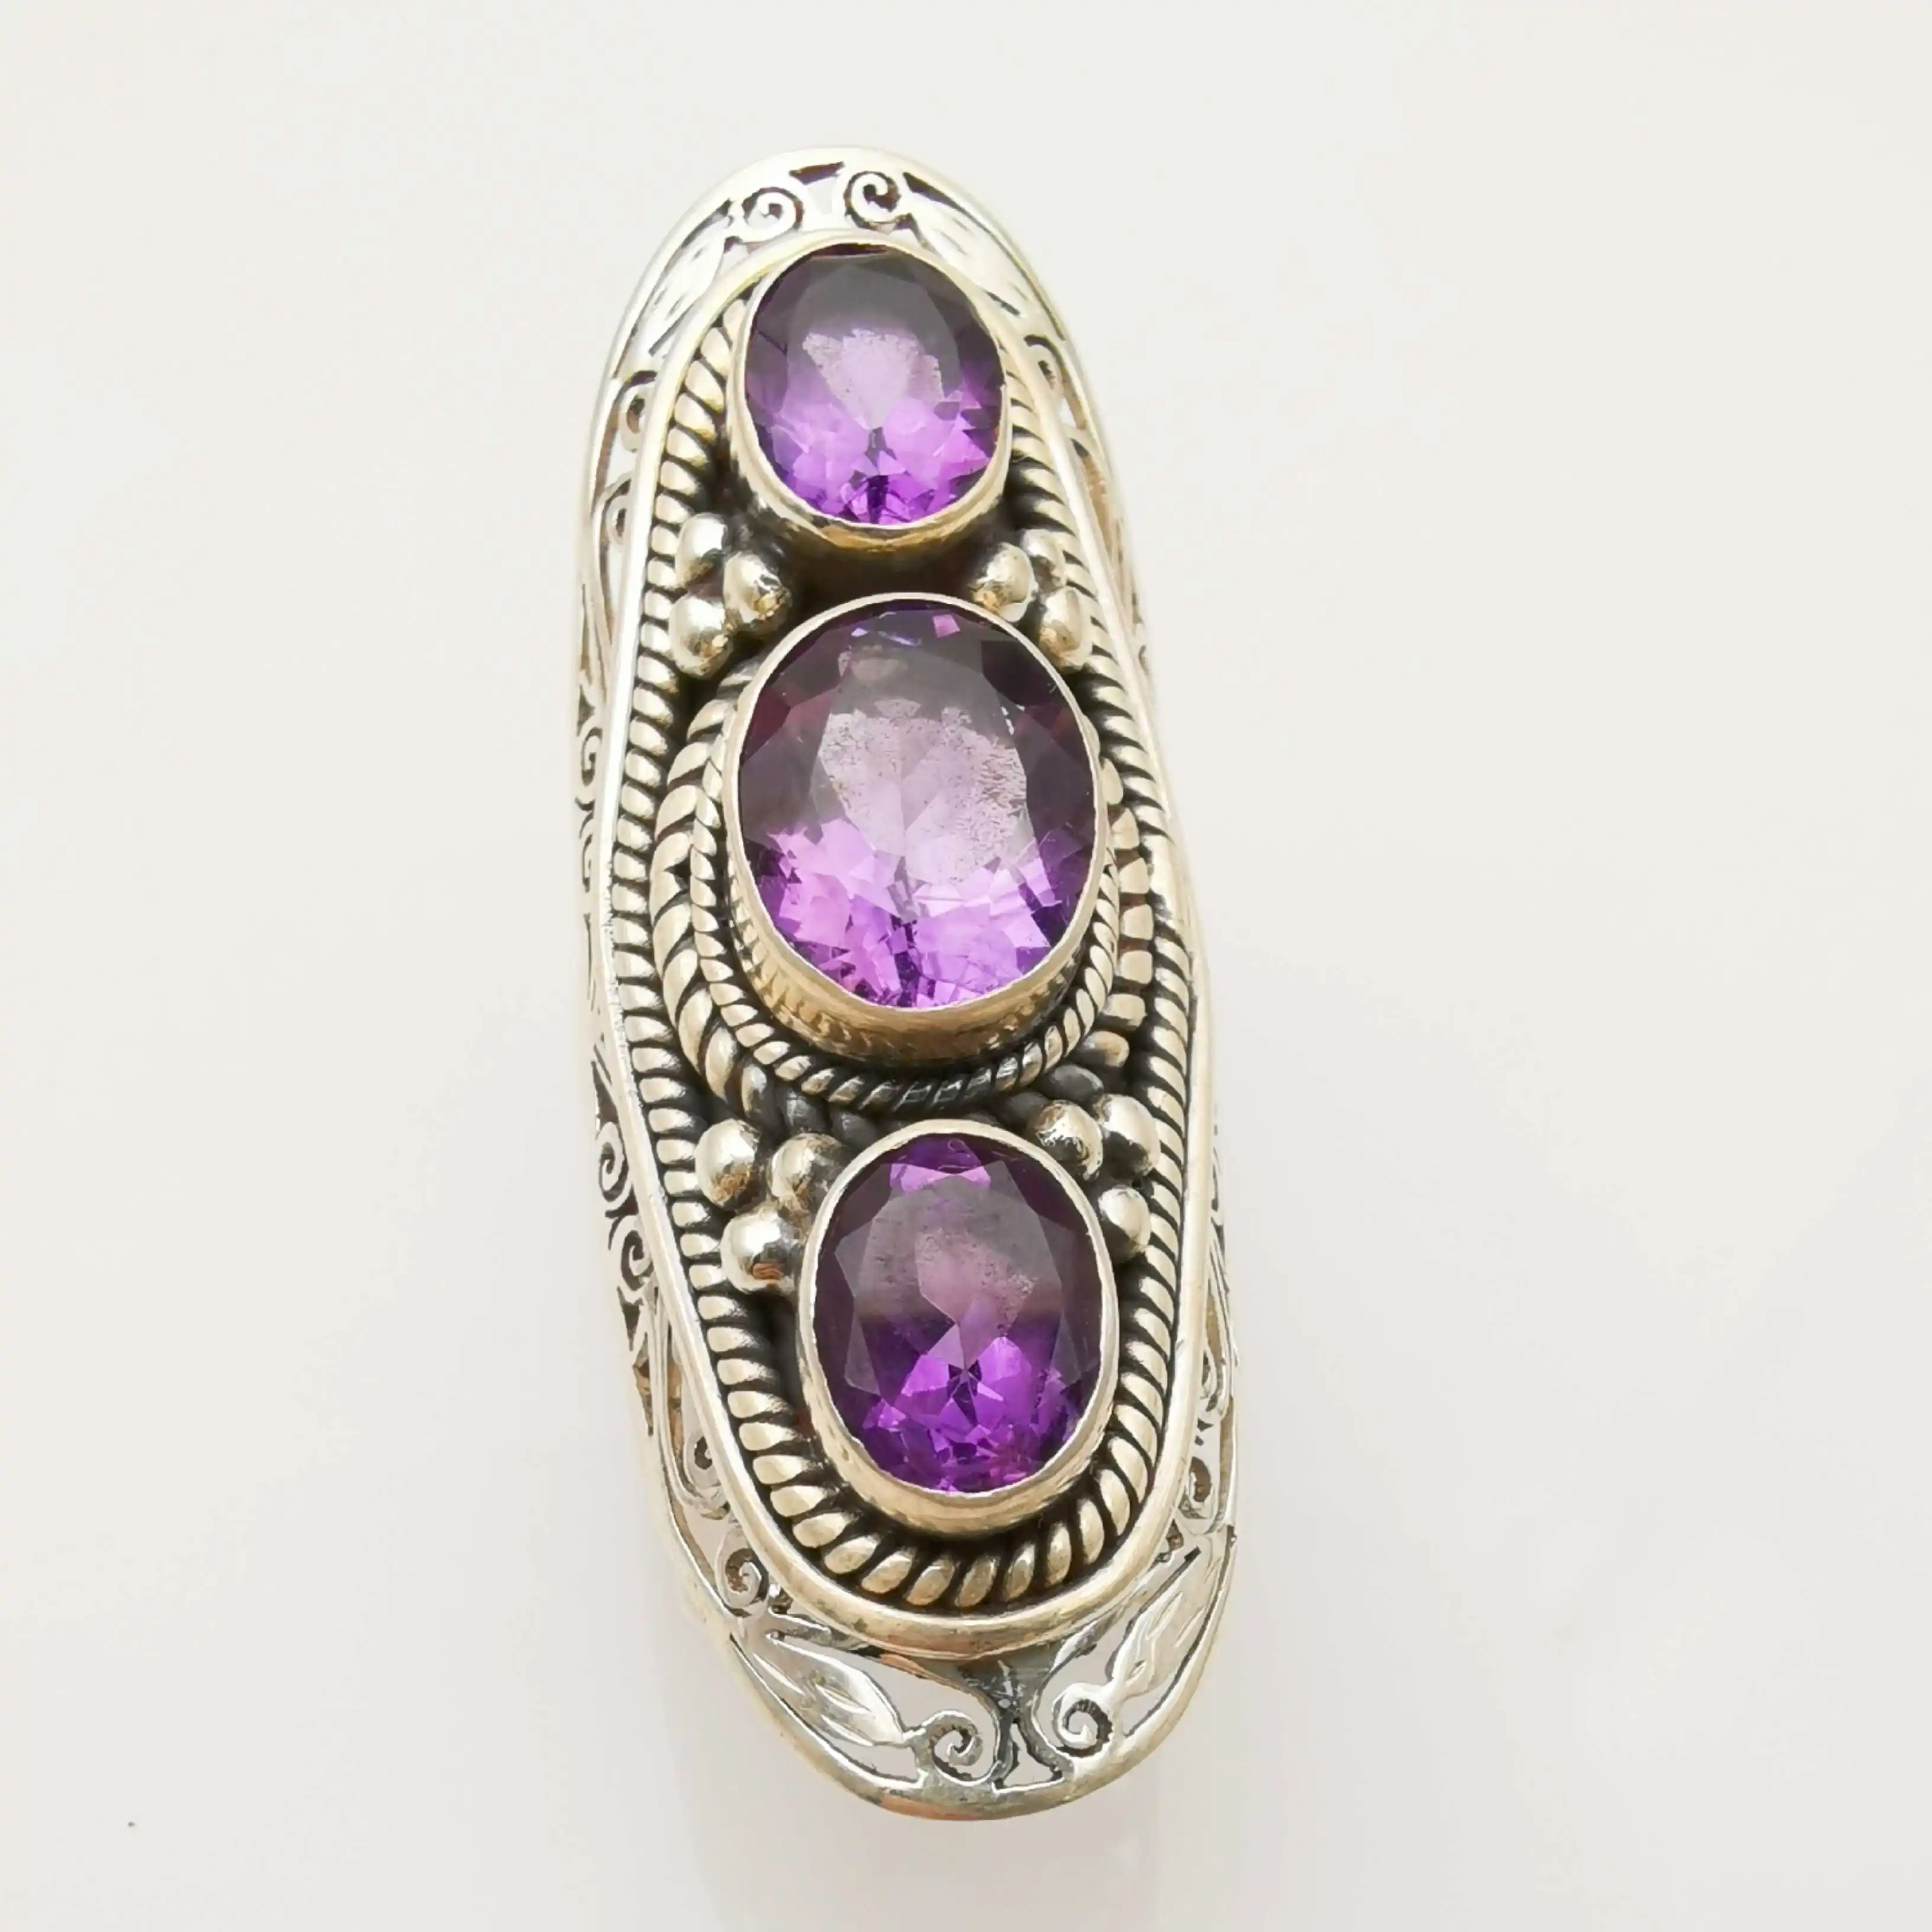 

Silver Saint 925 Sterling Silver Inlaid Natural Amethyst Ring, Handmade in Nepal, Adjustable Opening Main Stone 10x12